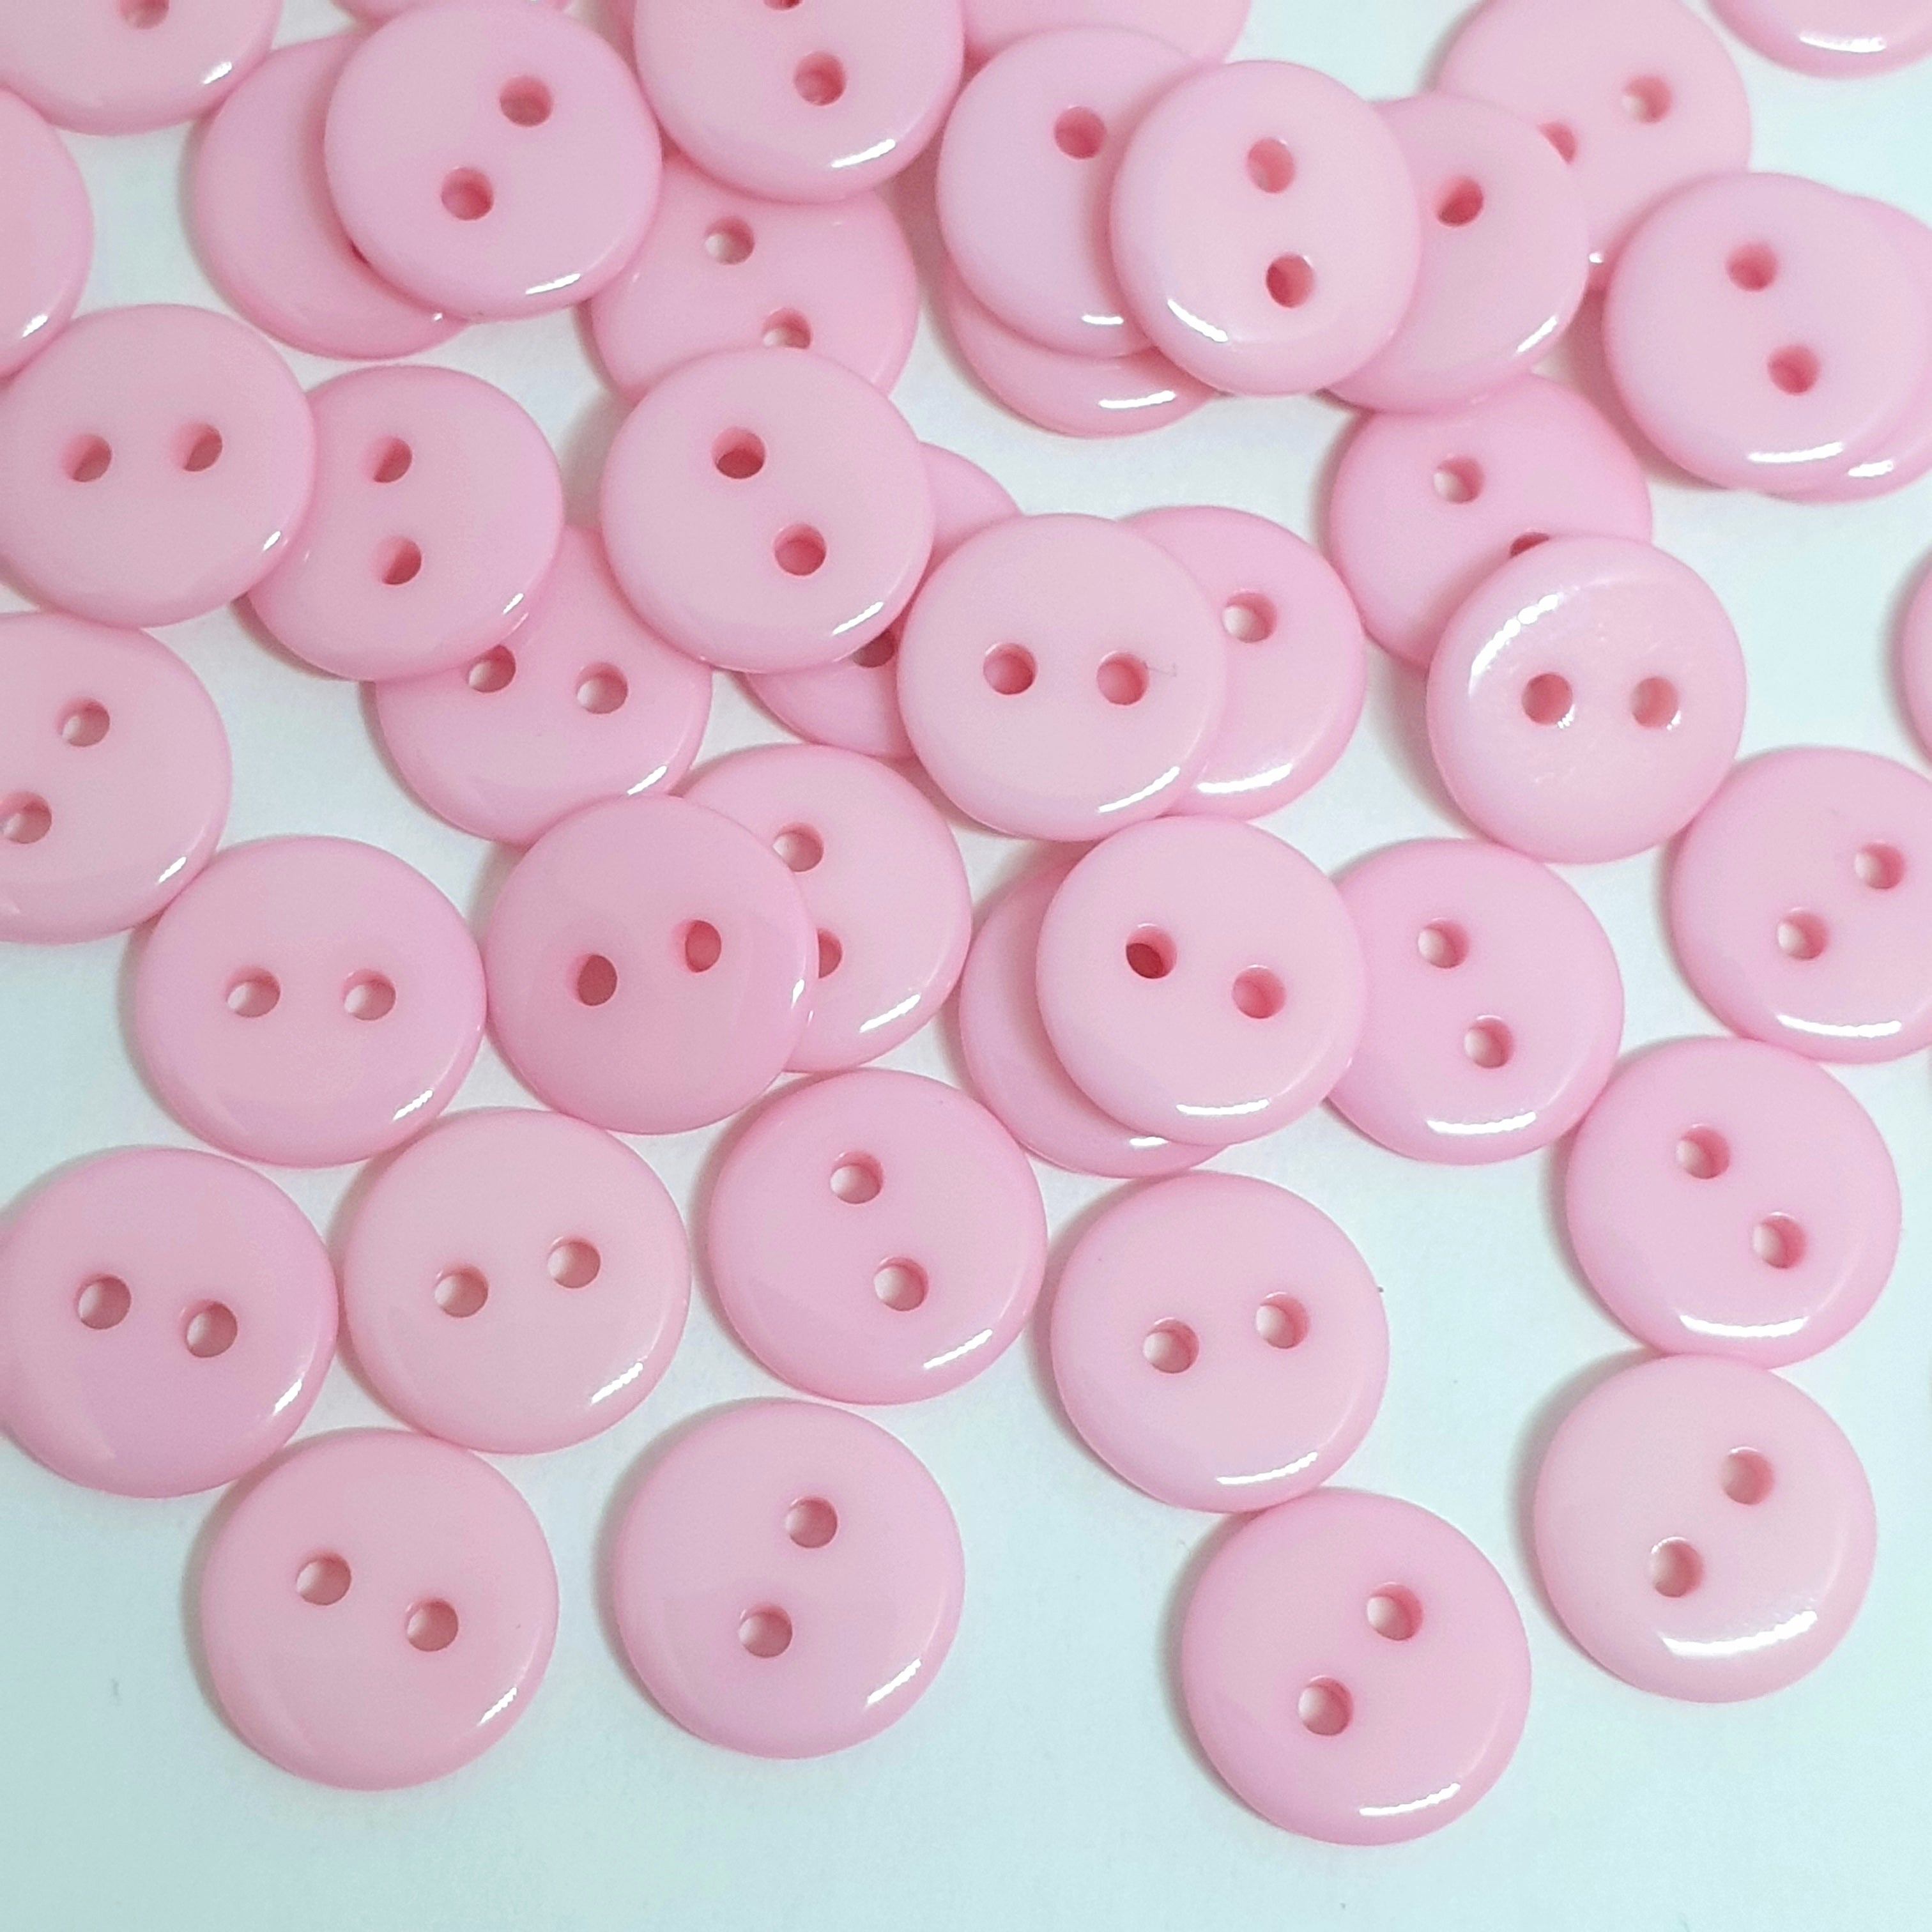 MajorCrafts 120pcs 9mm Light Pink 2 Holes Small Round Resin Sewing Buttons B03